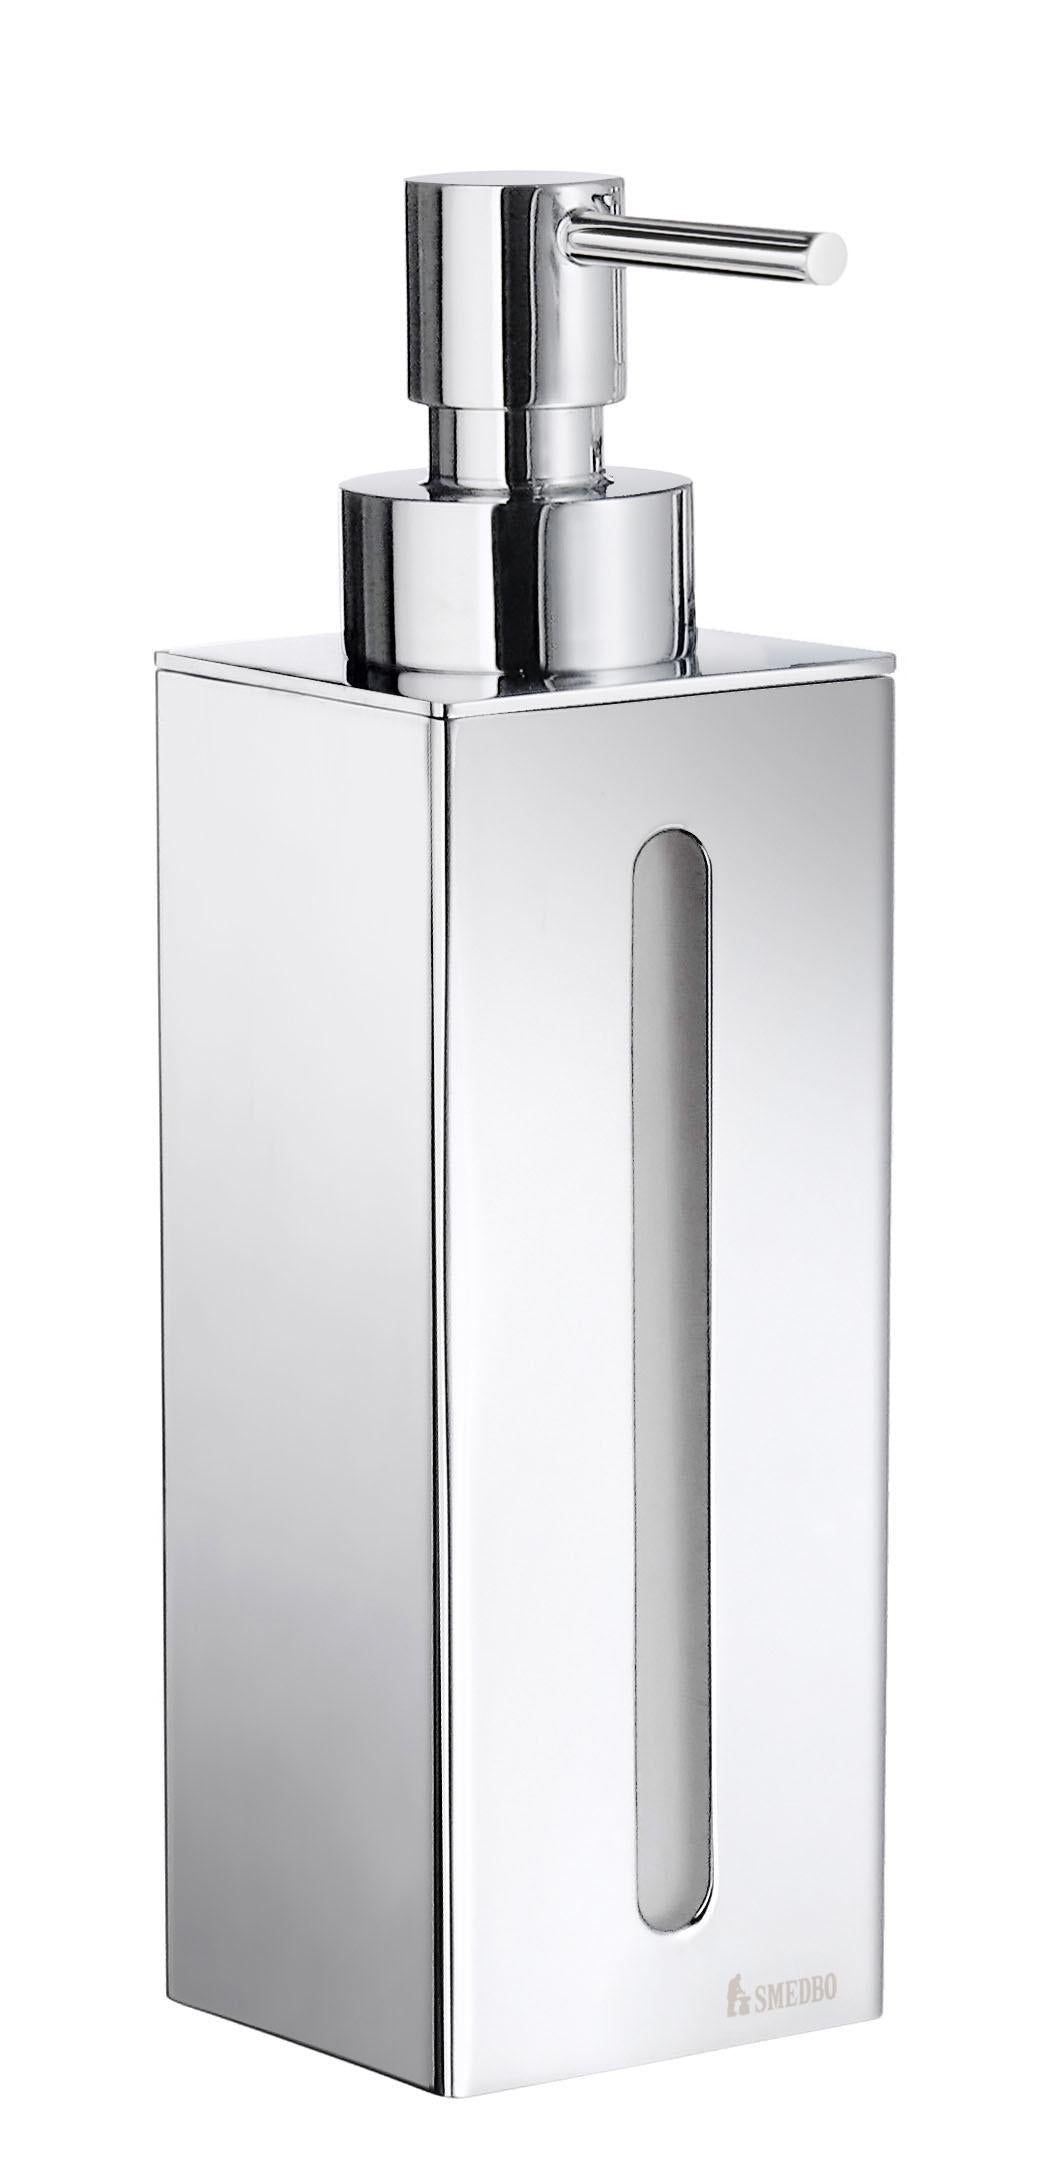 Smedbo Outline Soap Dispenser 1 container in Polished Chrome